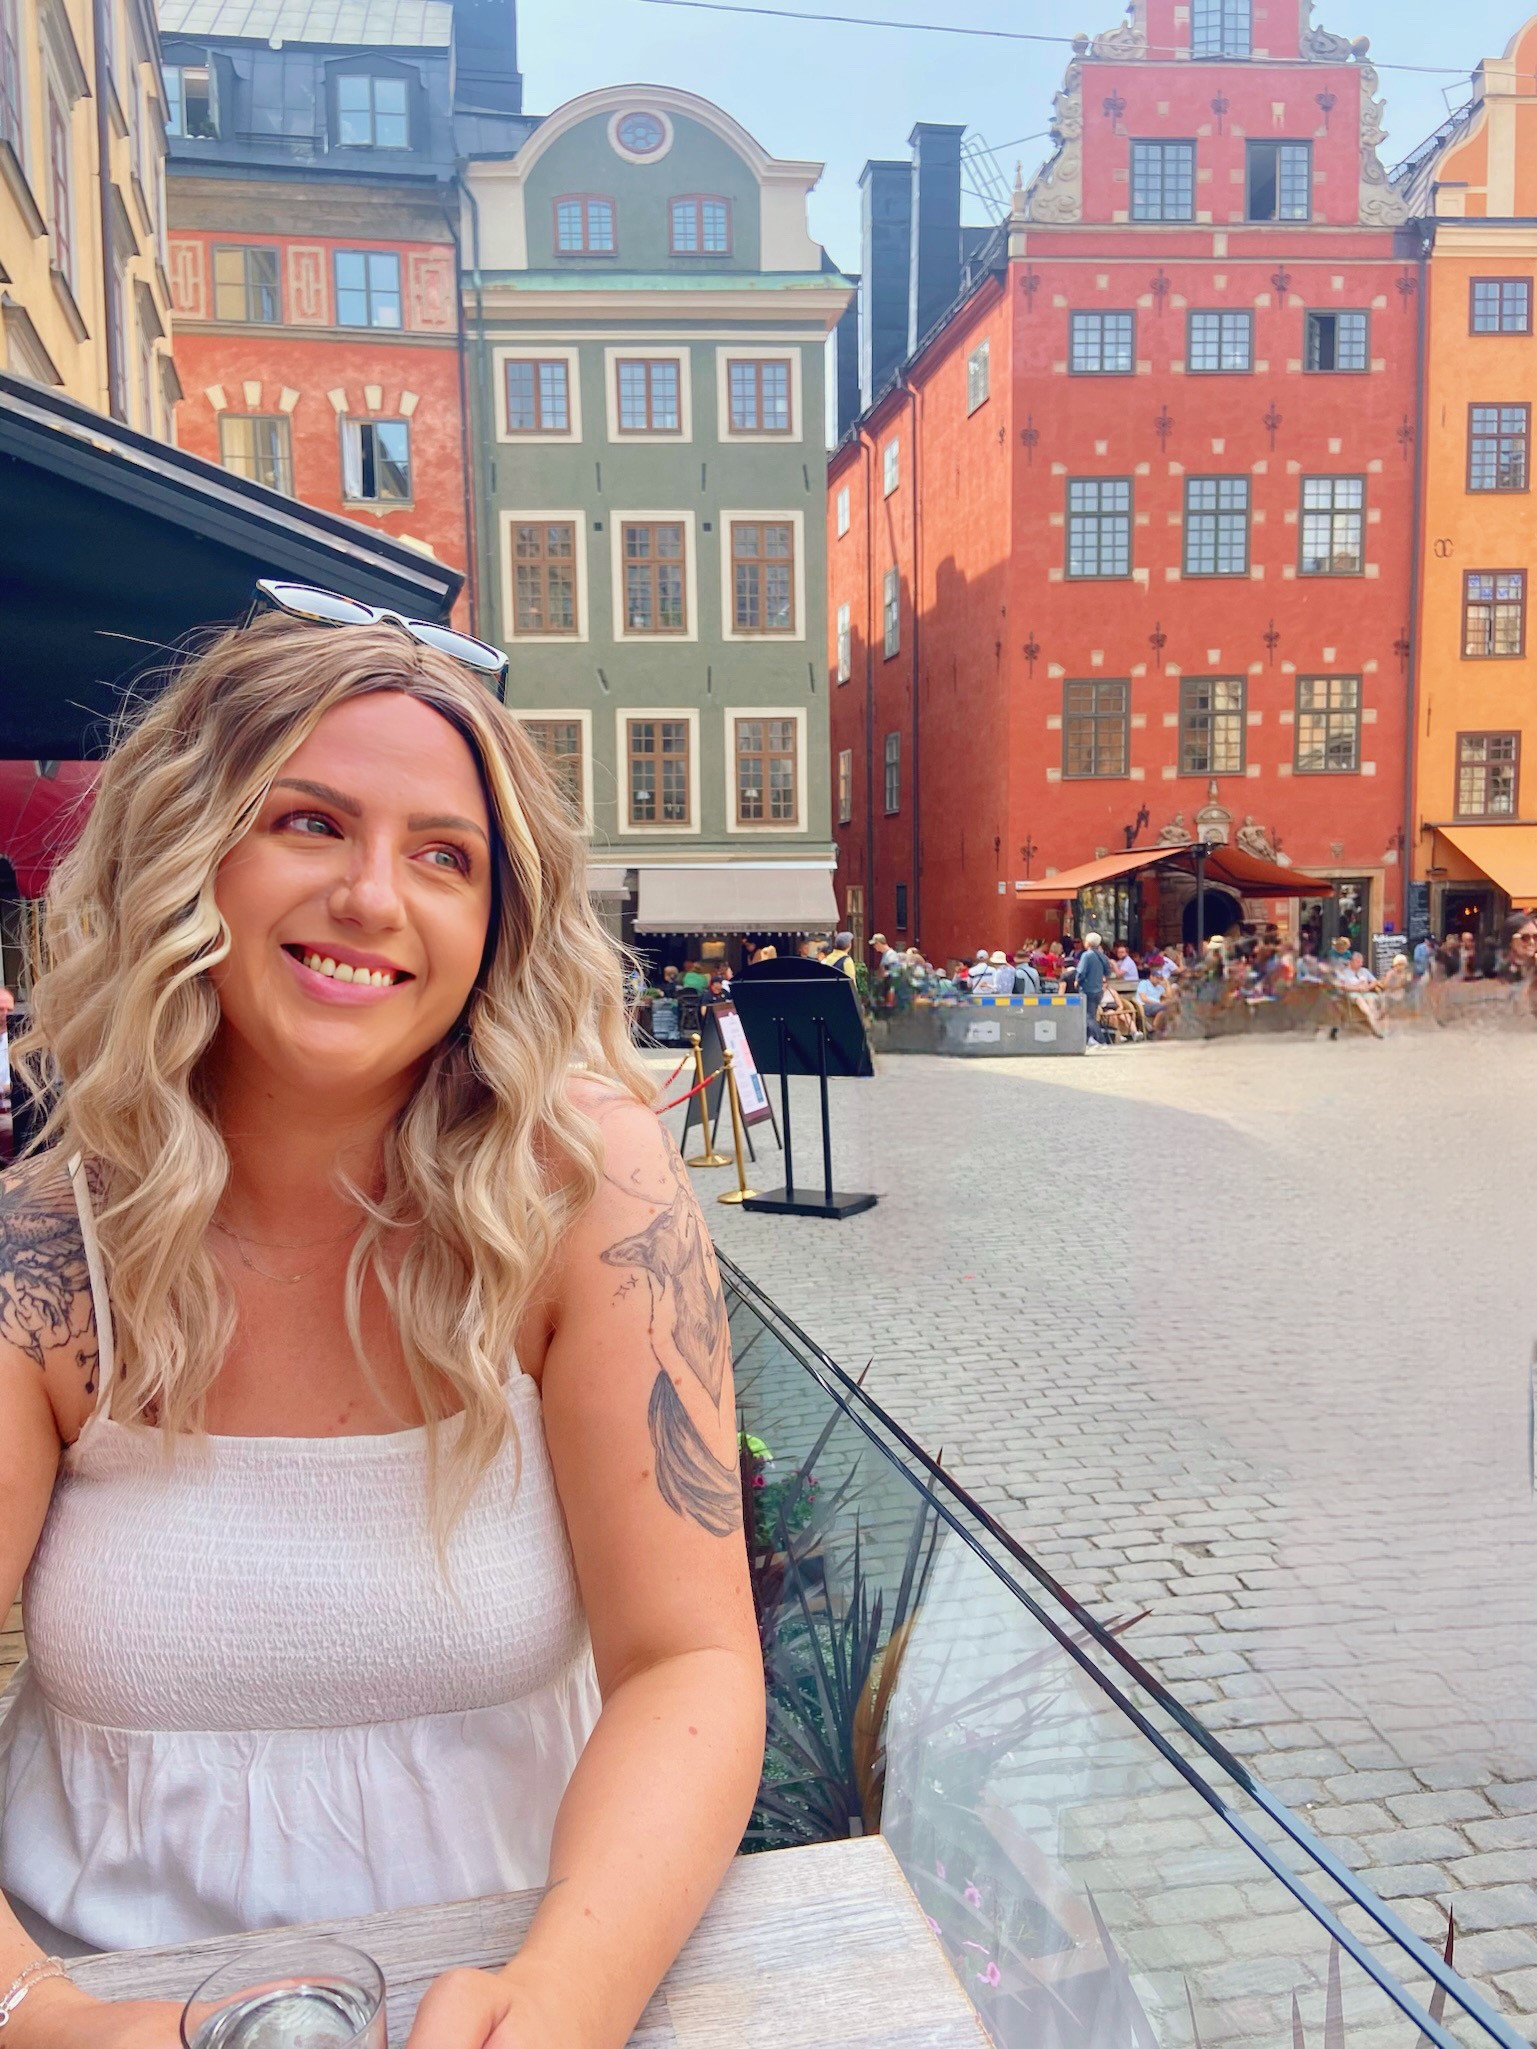 Jessica in Stockholm, on a holiday with her friend. She smiles, wears sunglasses on her head and has a white summer dress and long wavy fair hair